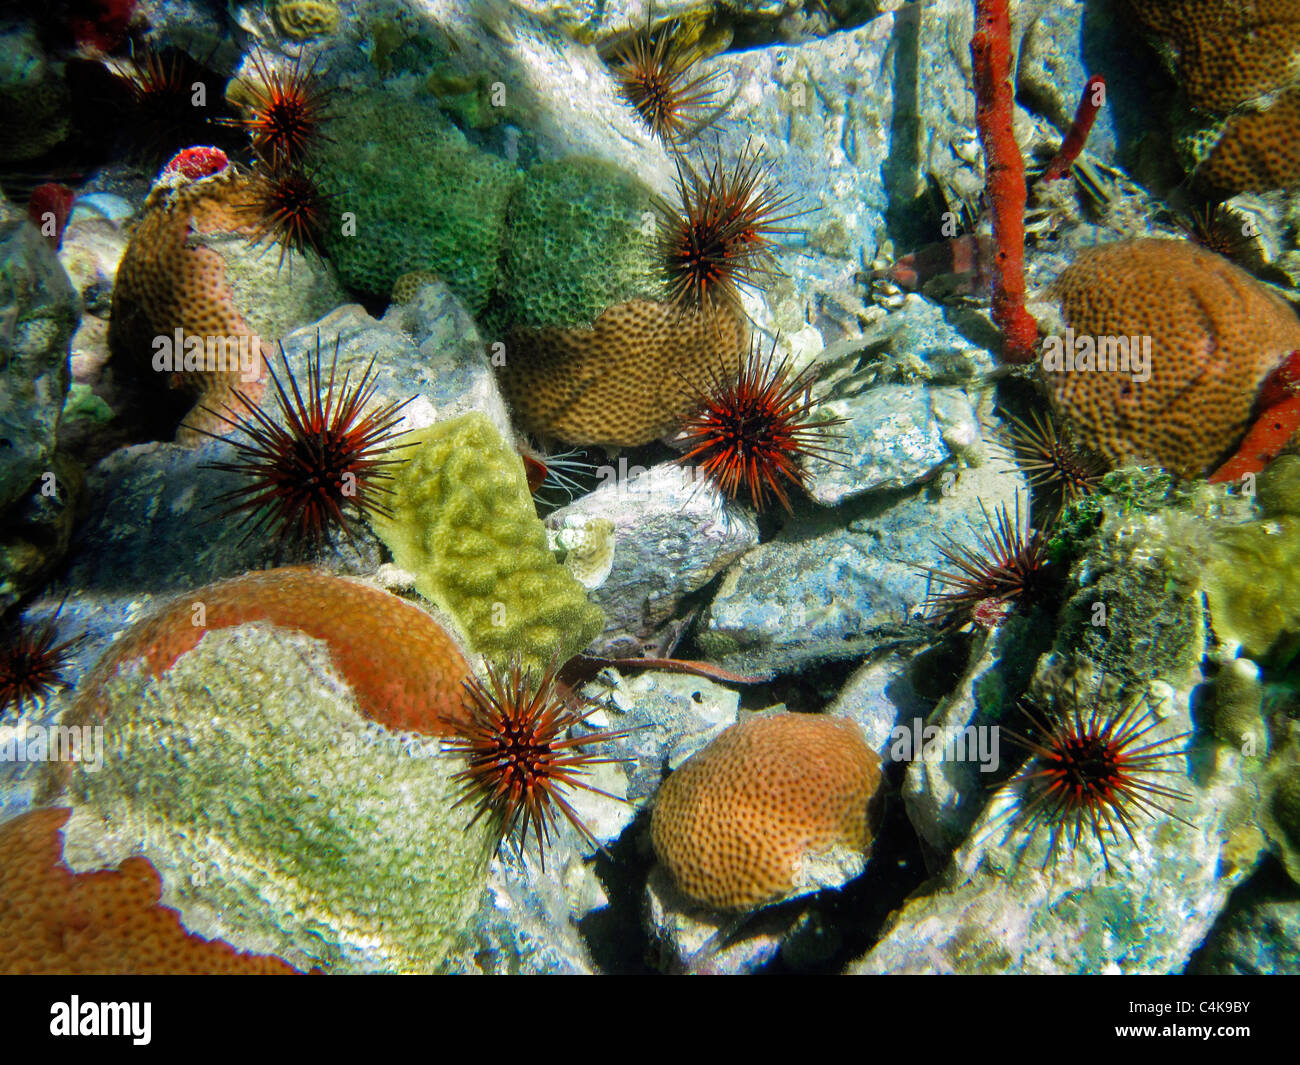 Long Spined Sea Urchins, and Scarlet Corals. St. John. Virgin Islands Virgin IslandsVirgin Islands Coral Reef National Monument. Stock Photo